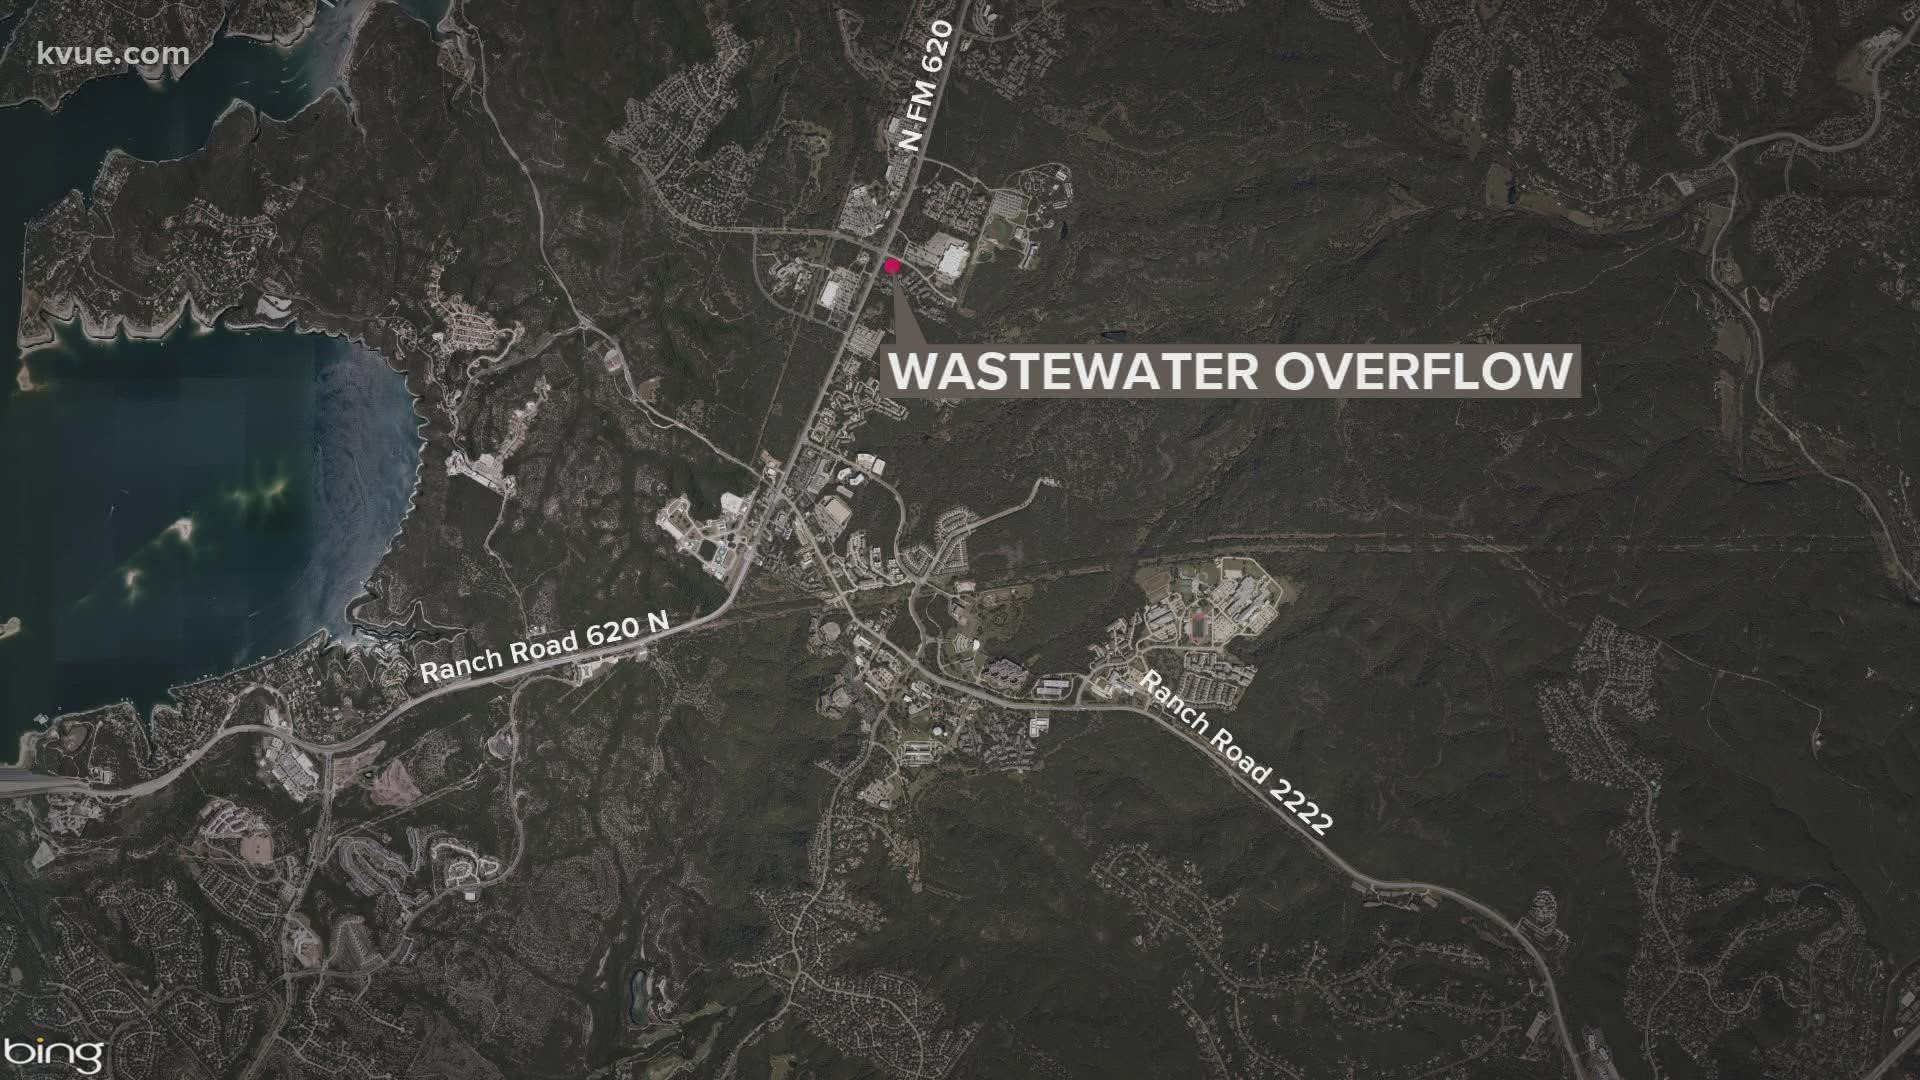 More than 100,000 gallons of wastewater spilled into a commercial storm drain off FM 620 in northwest Austin on Friday.